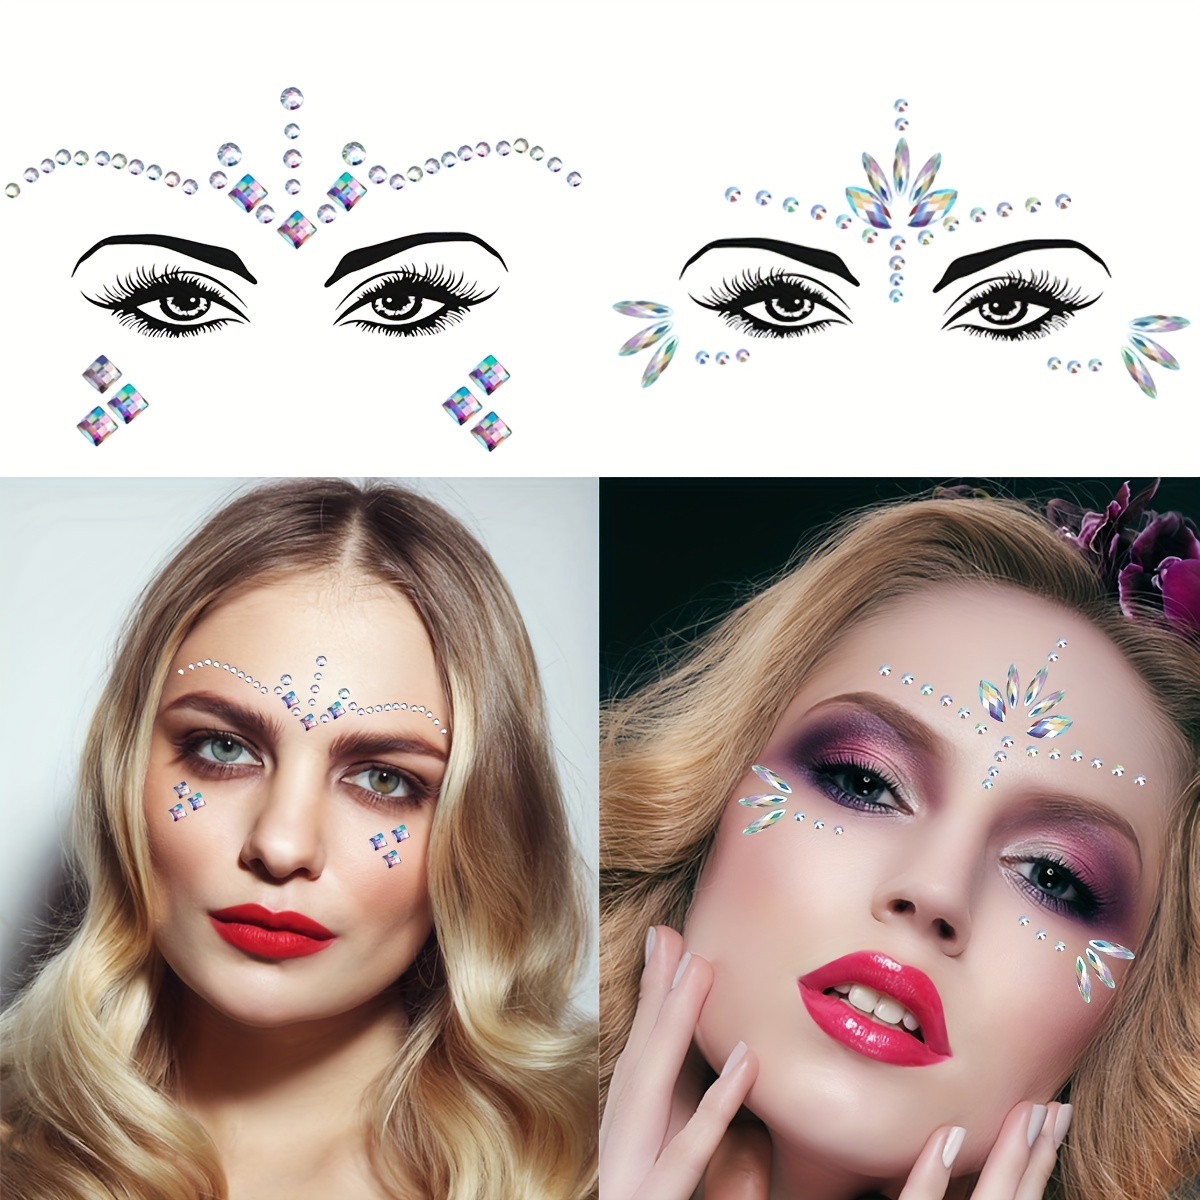 iMethod Face Jewels and Body Glitter - Face Gems, Mermaid Face Jewels Stick  On, Holographic Cosmetic Face Glitter, for Festival Holiday Costumes 